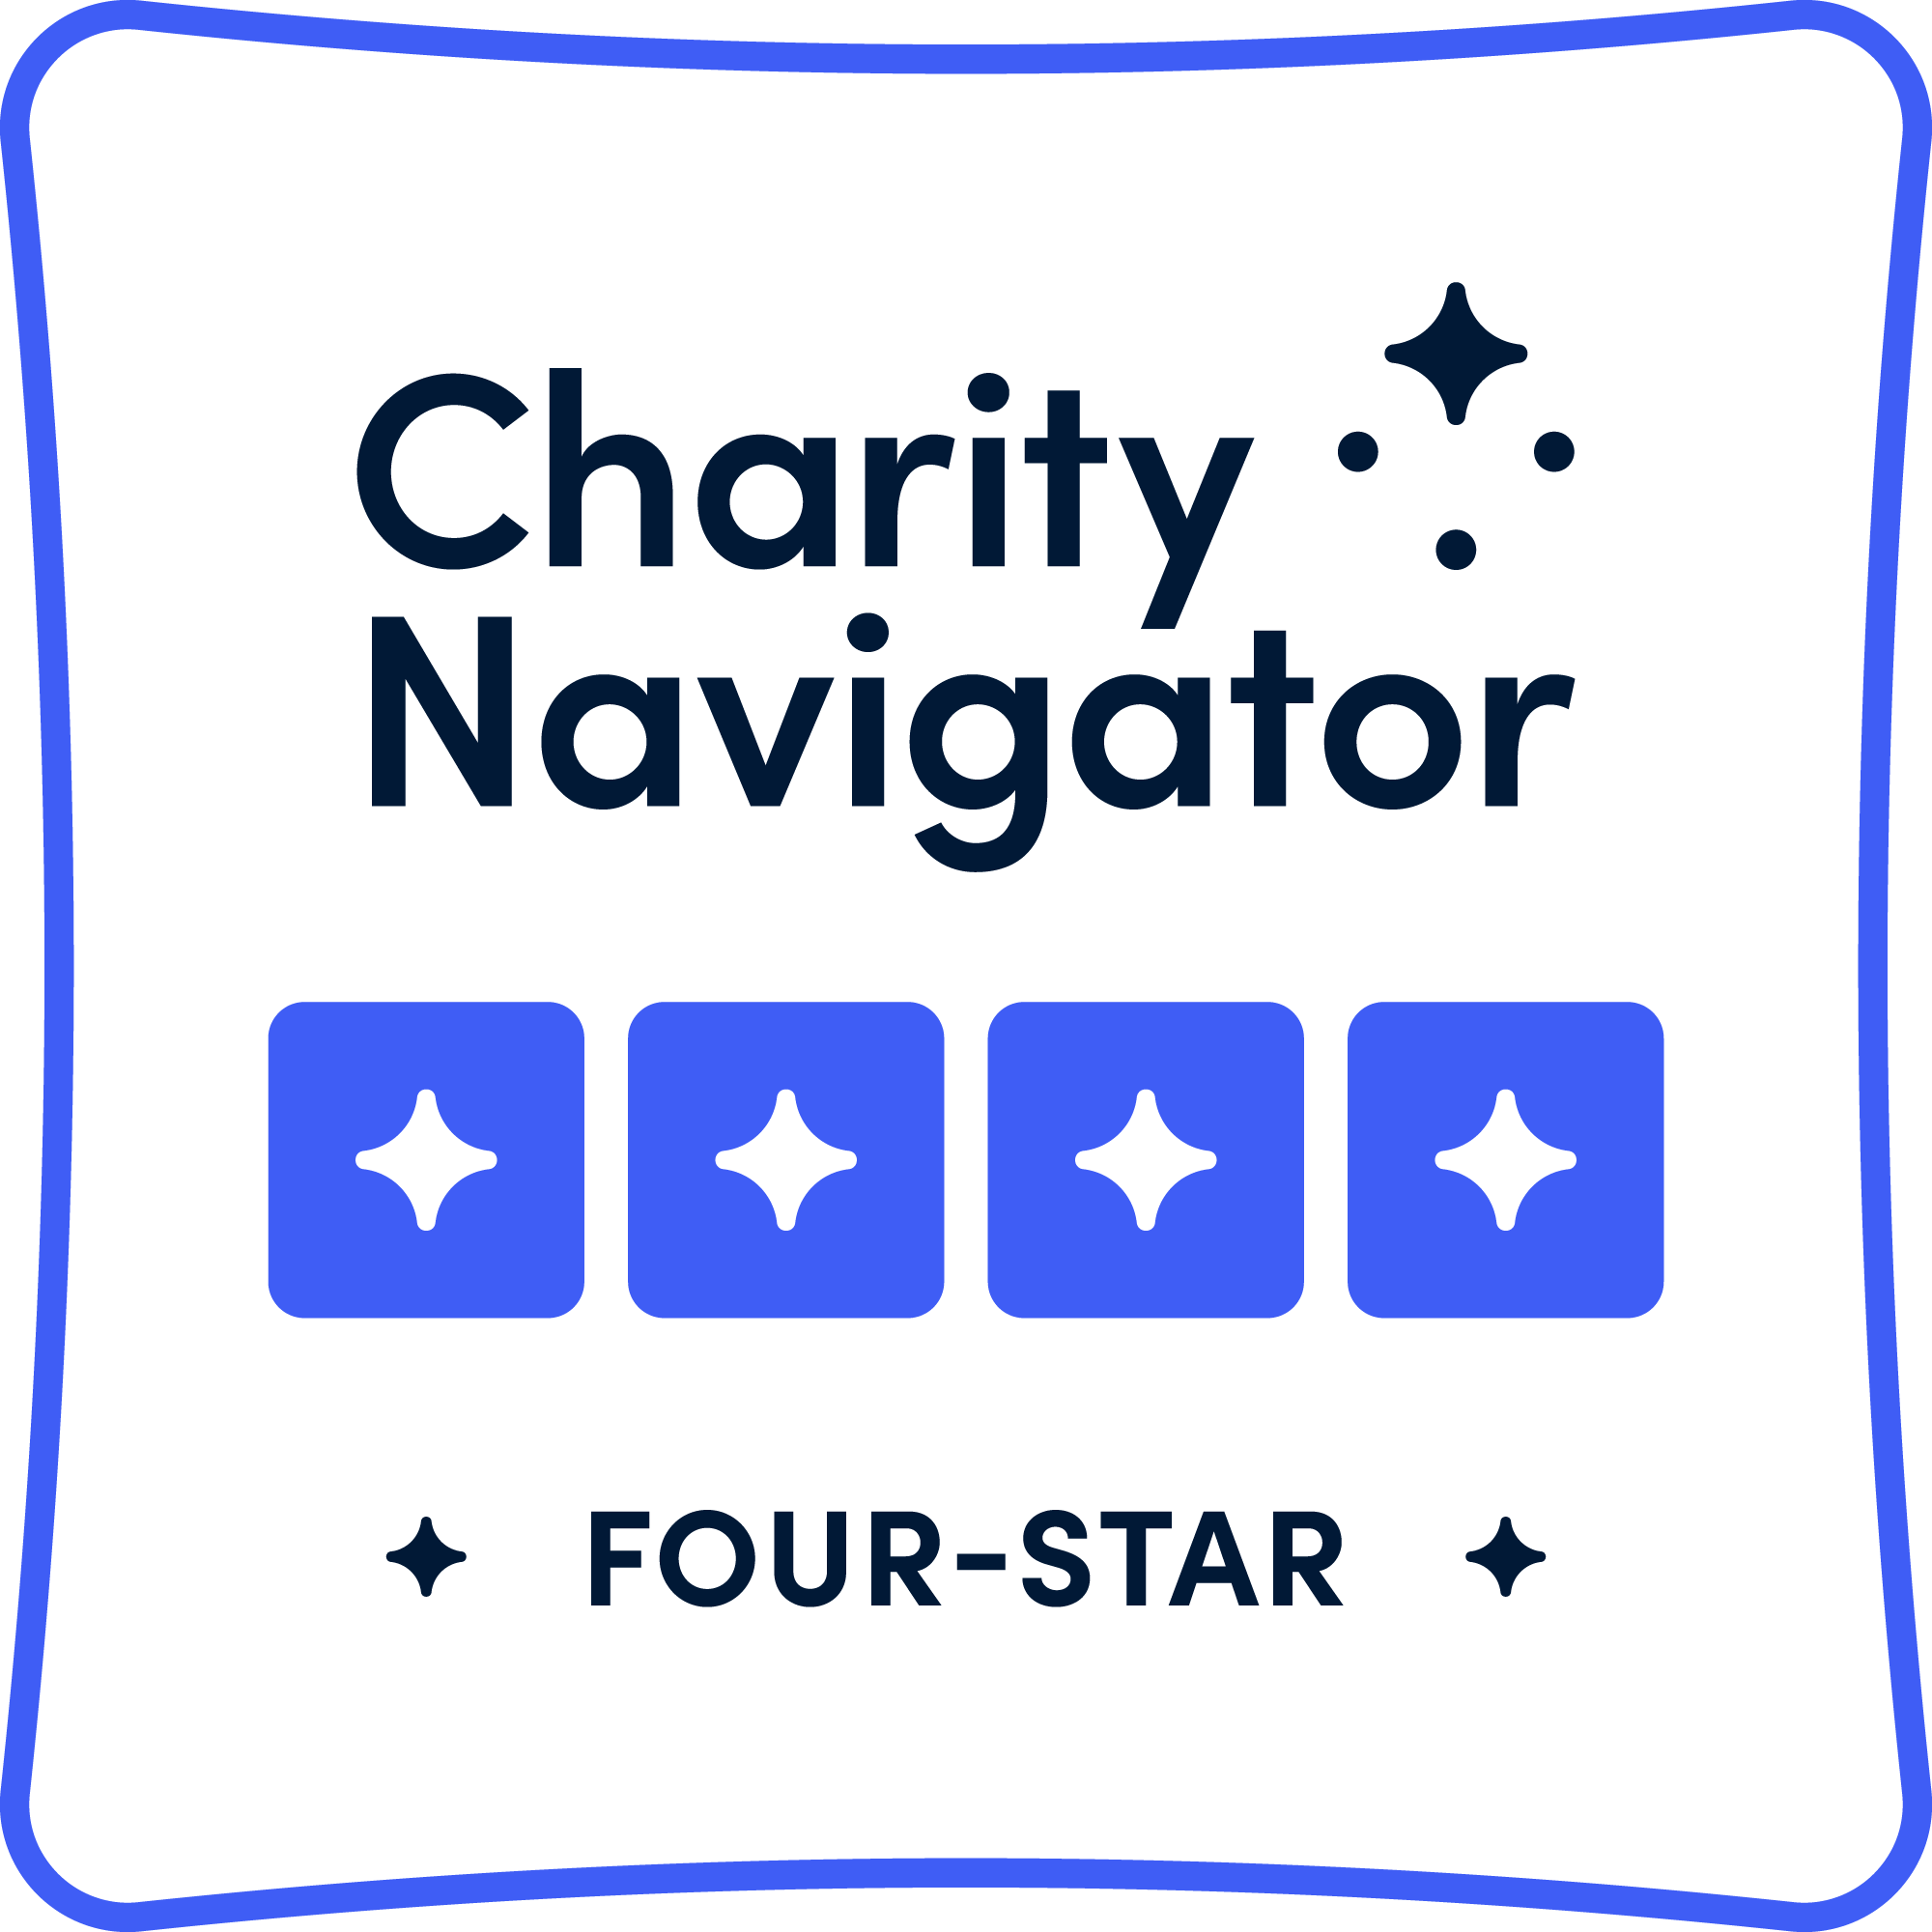 Open Table has a Charity Navigator 4-star rating